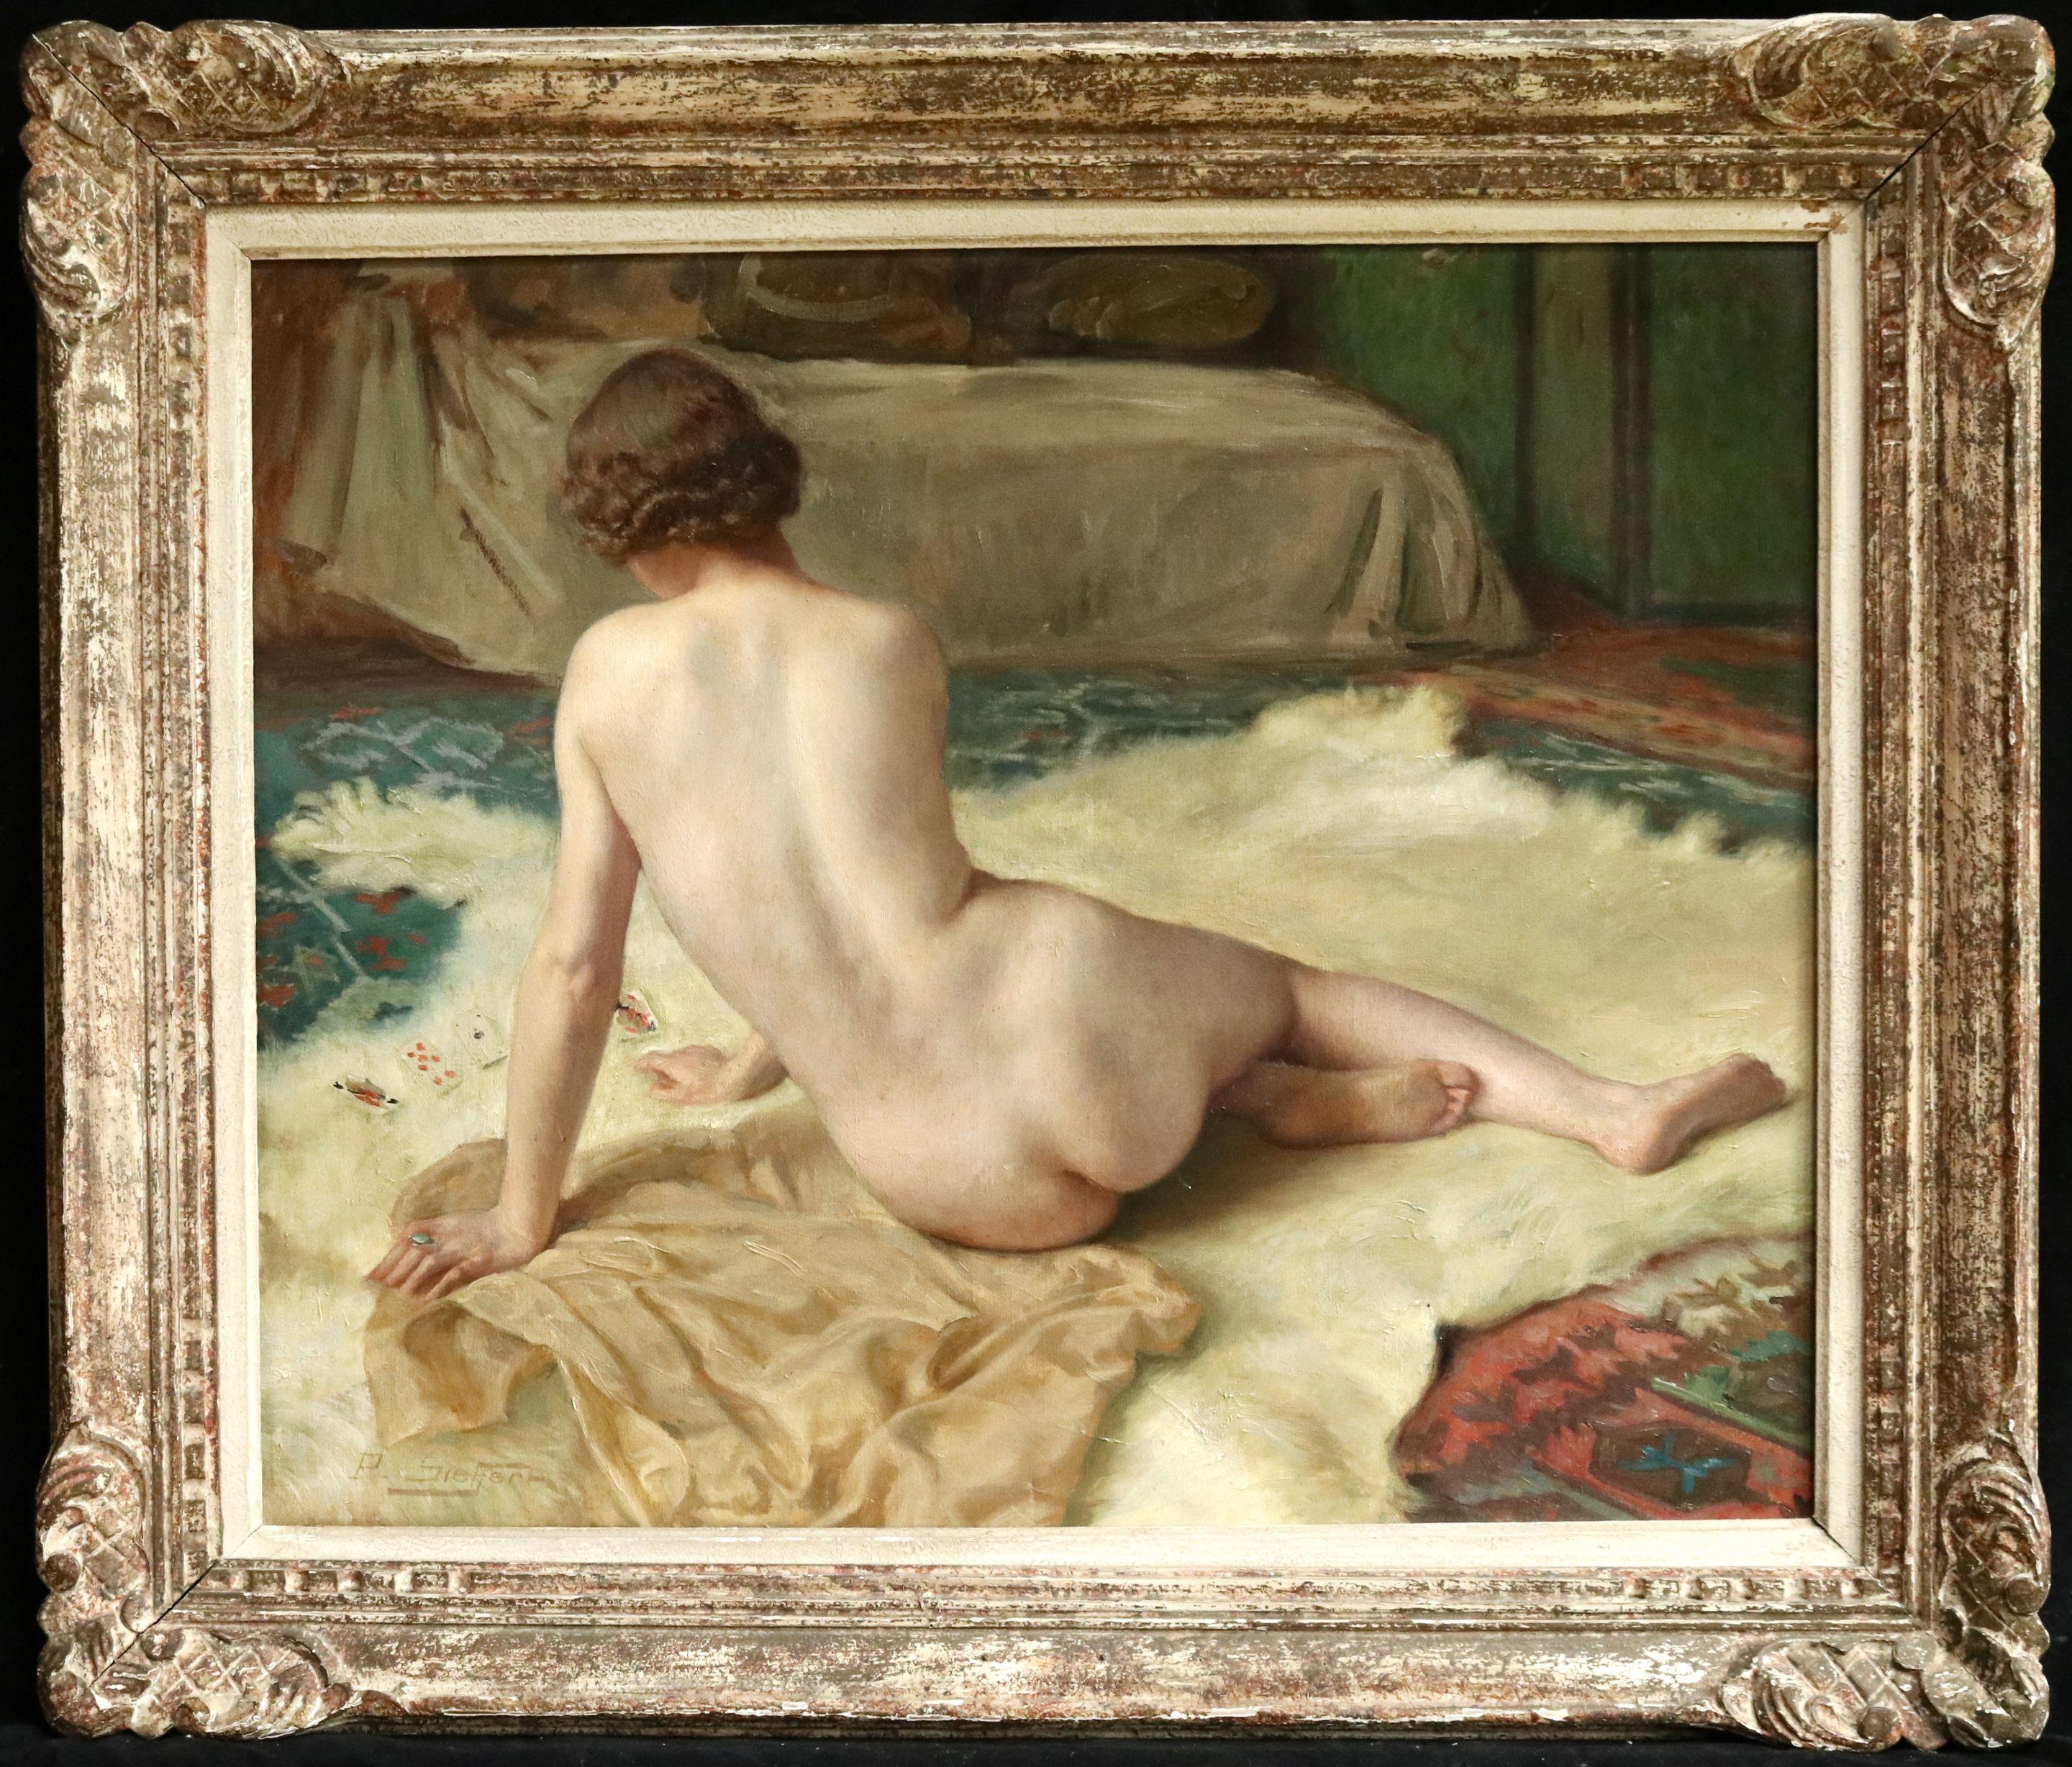 Oil on canvas by Paul Sieffert of a nude playing cards as she rests on a an animal skin rug. Signed lower let and further signed, dated 1939 and numbered verso. Framed dimensions are 26 inches high by 30 inches wide. This work is number 328 in the